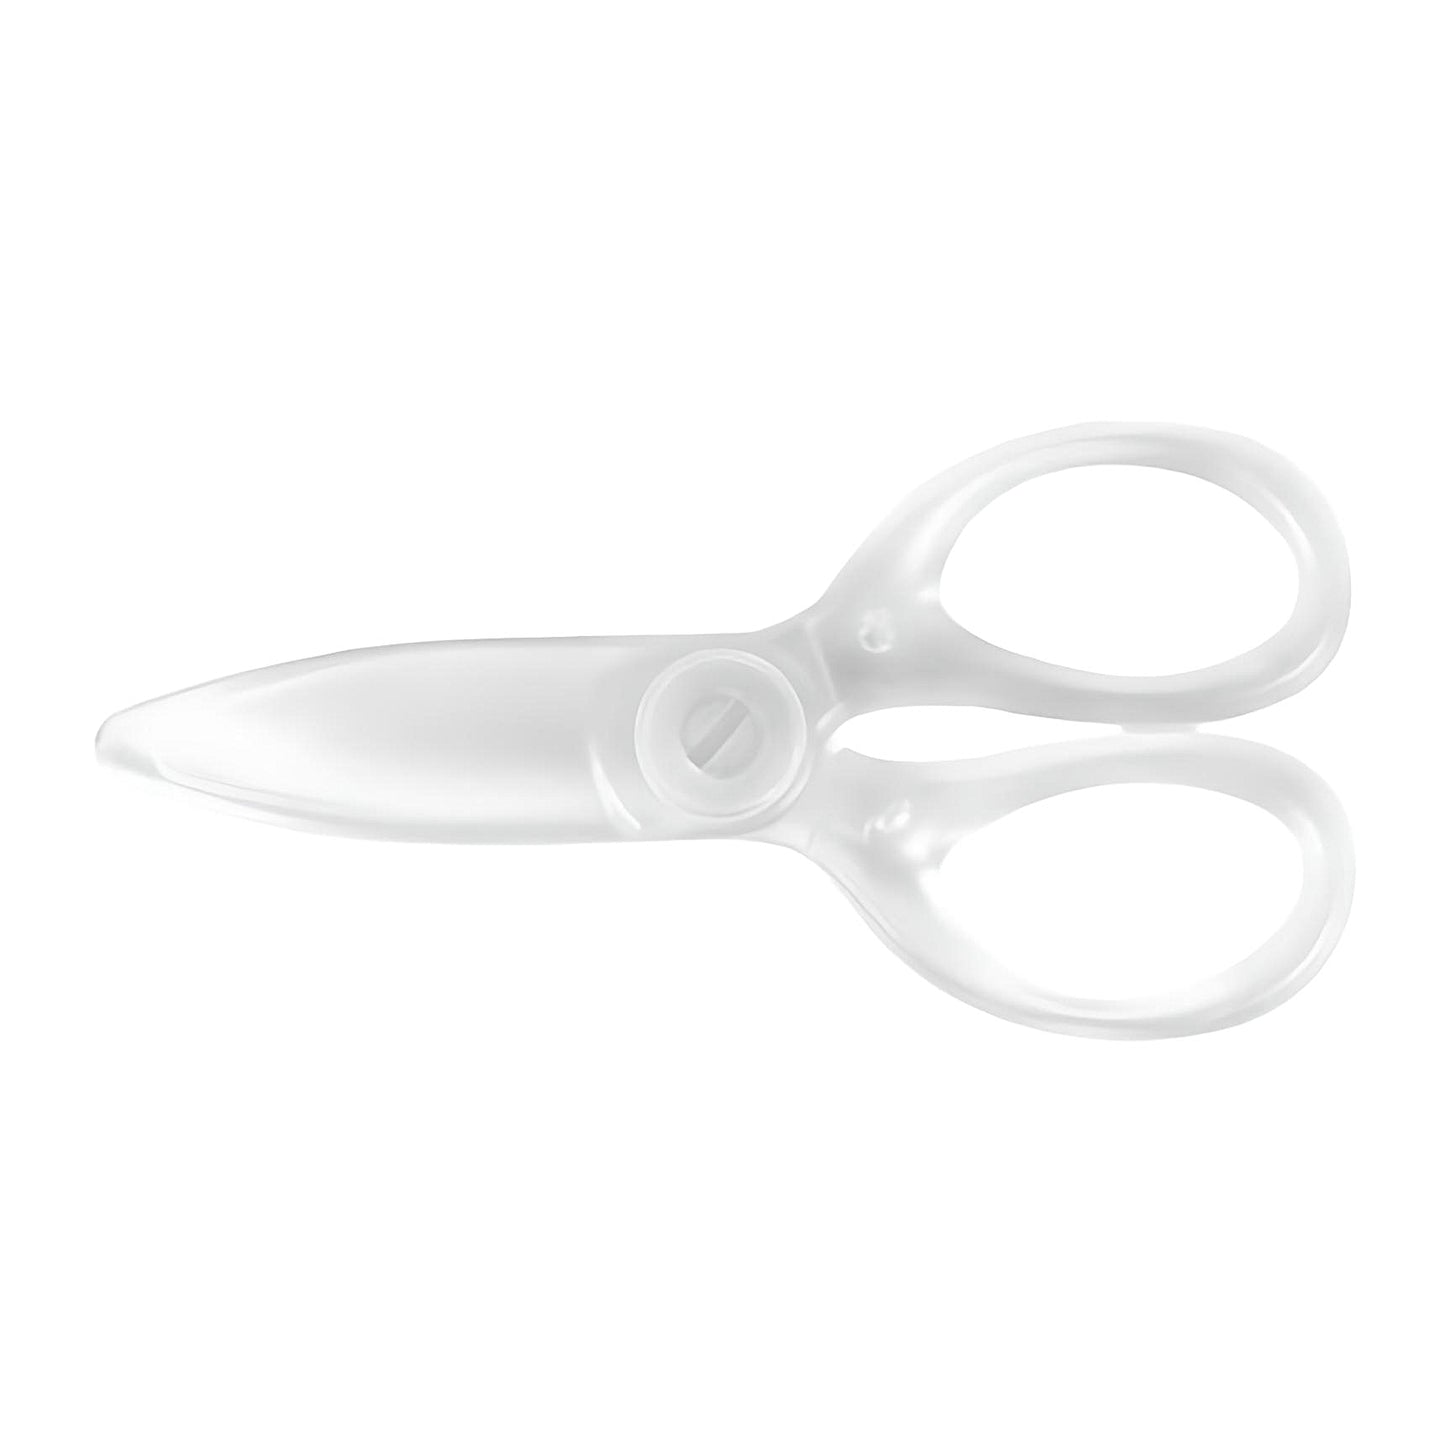 Kokuyo plastic scissors in transparent color on a white background